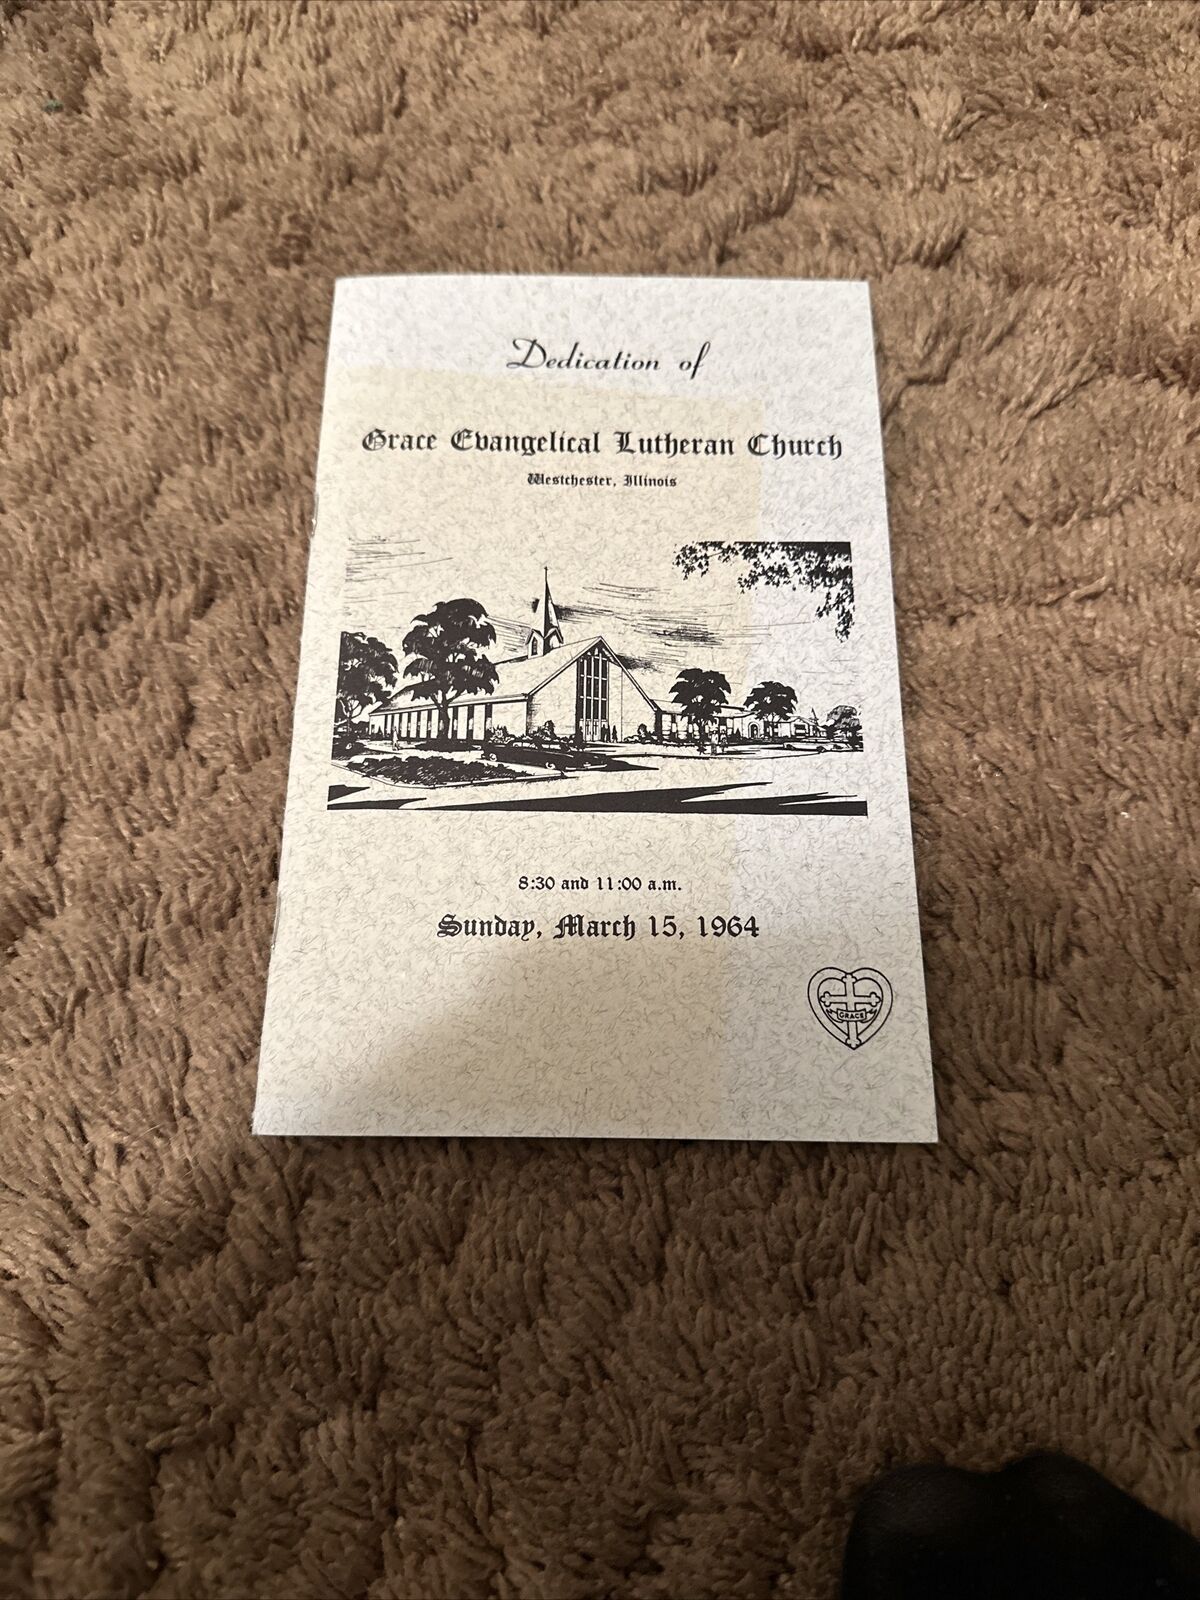 1964 dedication of grace Evangelical Lutheran Church Westchester Illinois